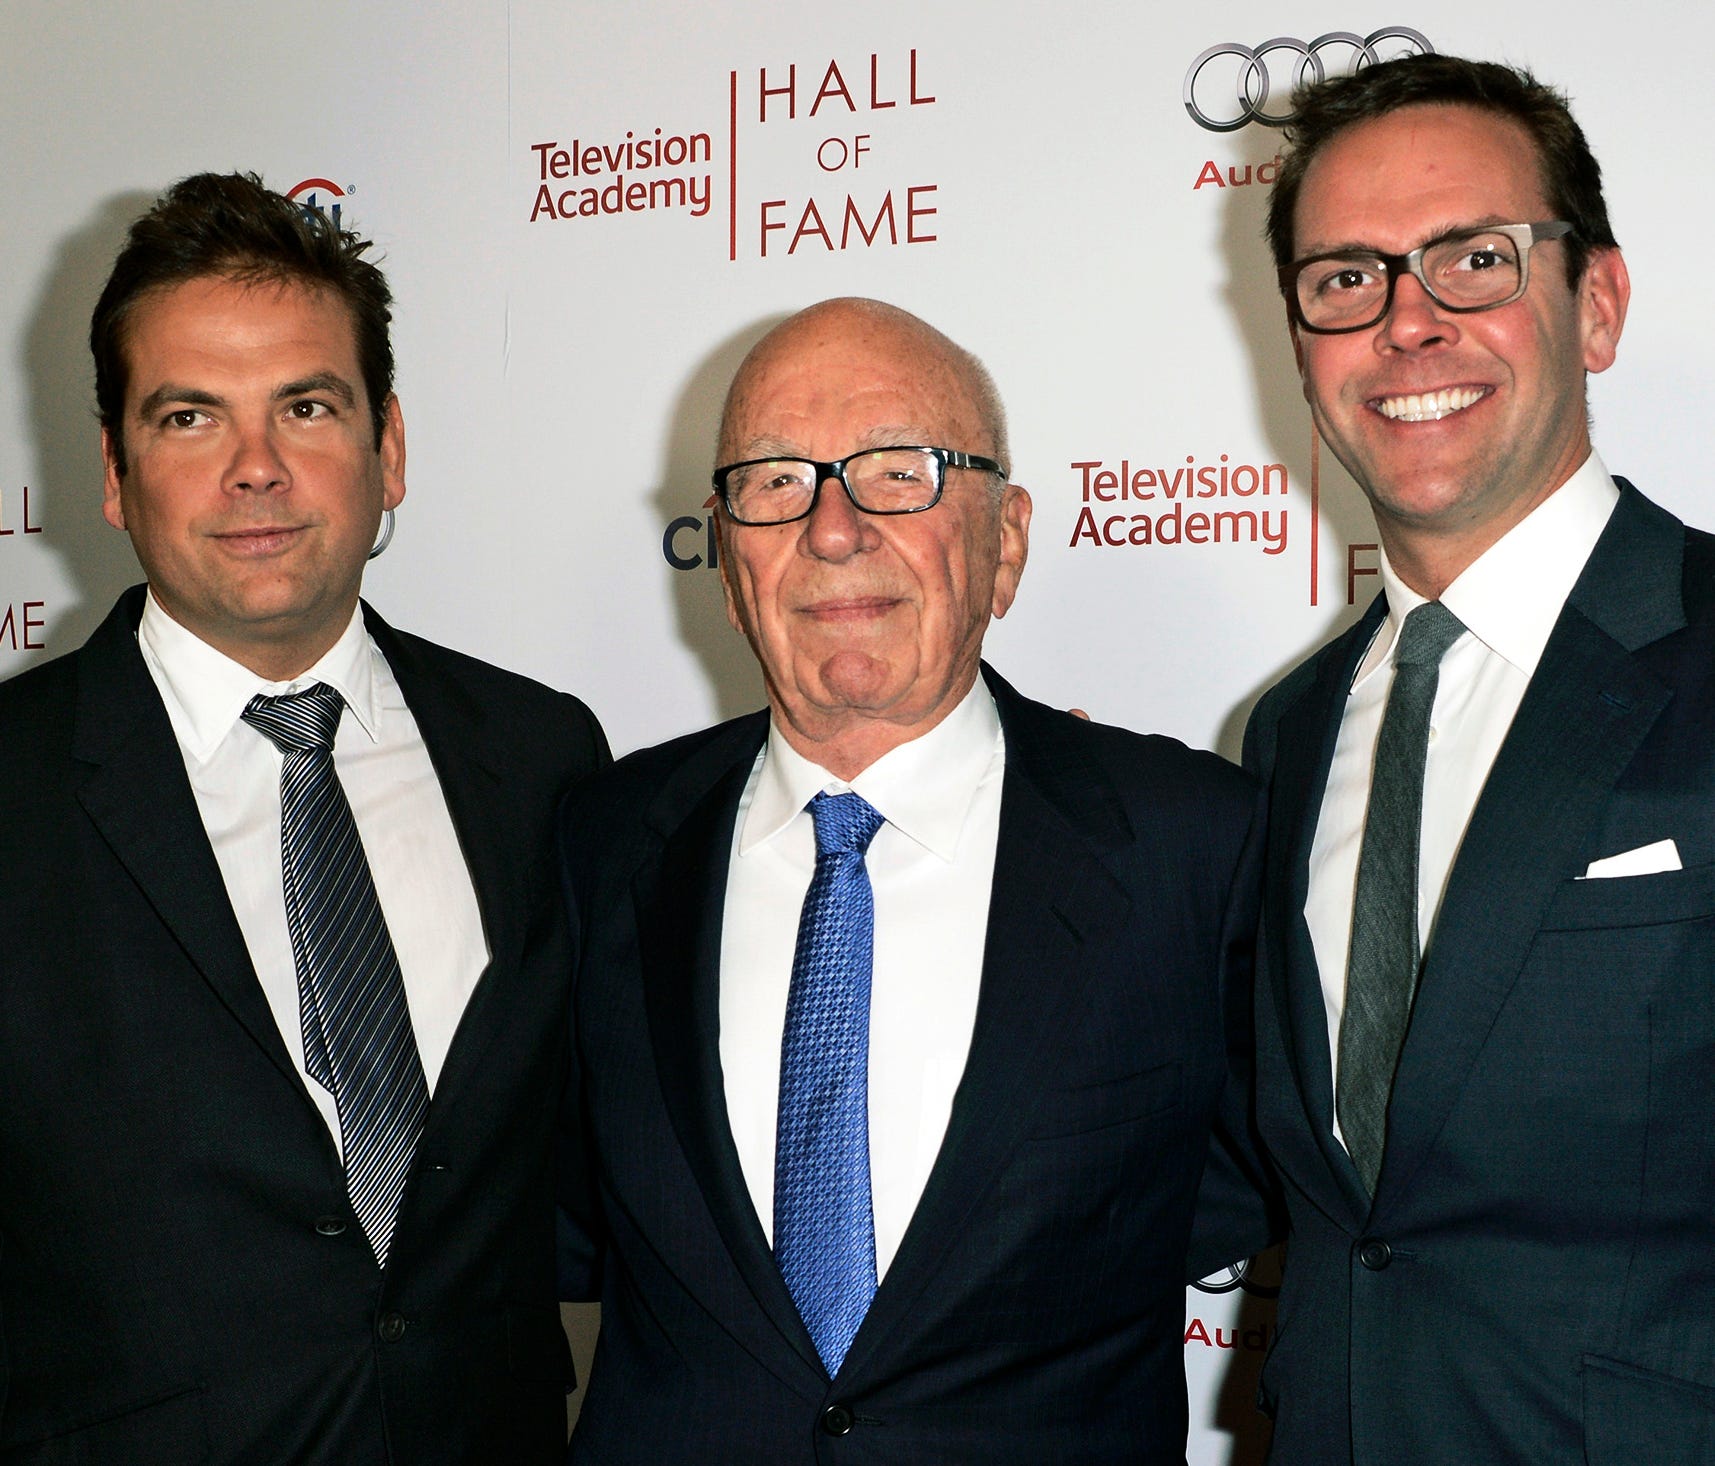 In this March 11, 2014 file photo, News Corp. Exeuctive Chairman Rupert Murdoch, center, and his sons, Lachlan, left, and James Murdoch attend the 2014 Television Academy Hall of Fame in Beverly Hills, Calif.